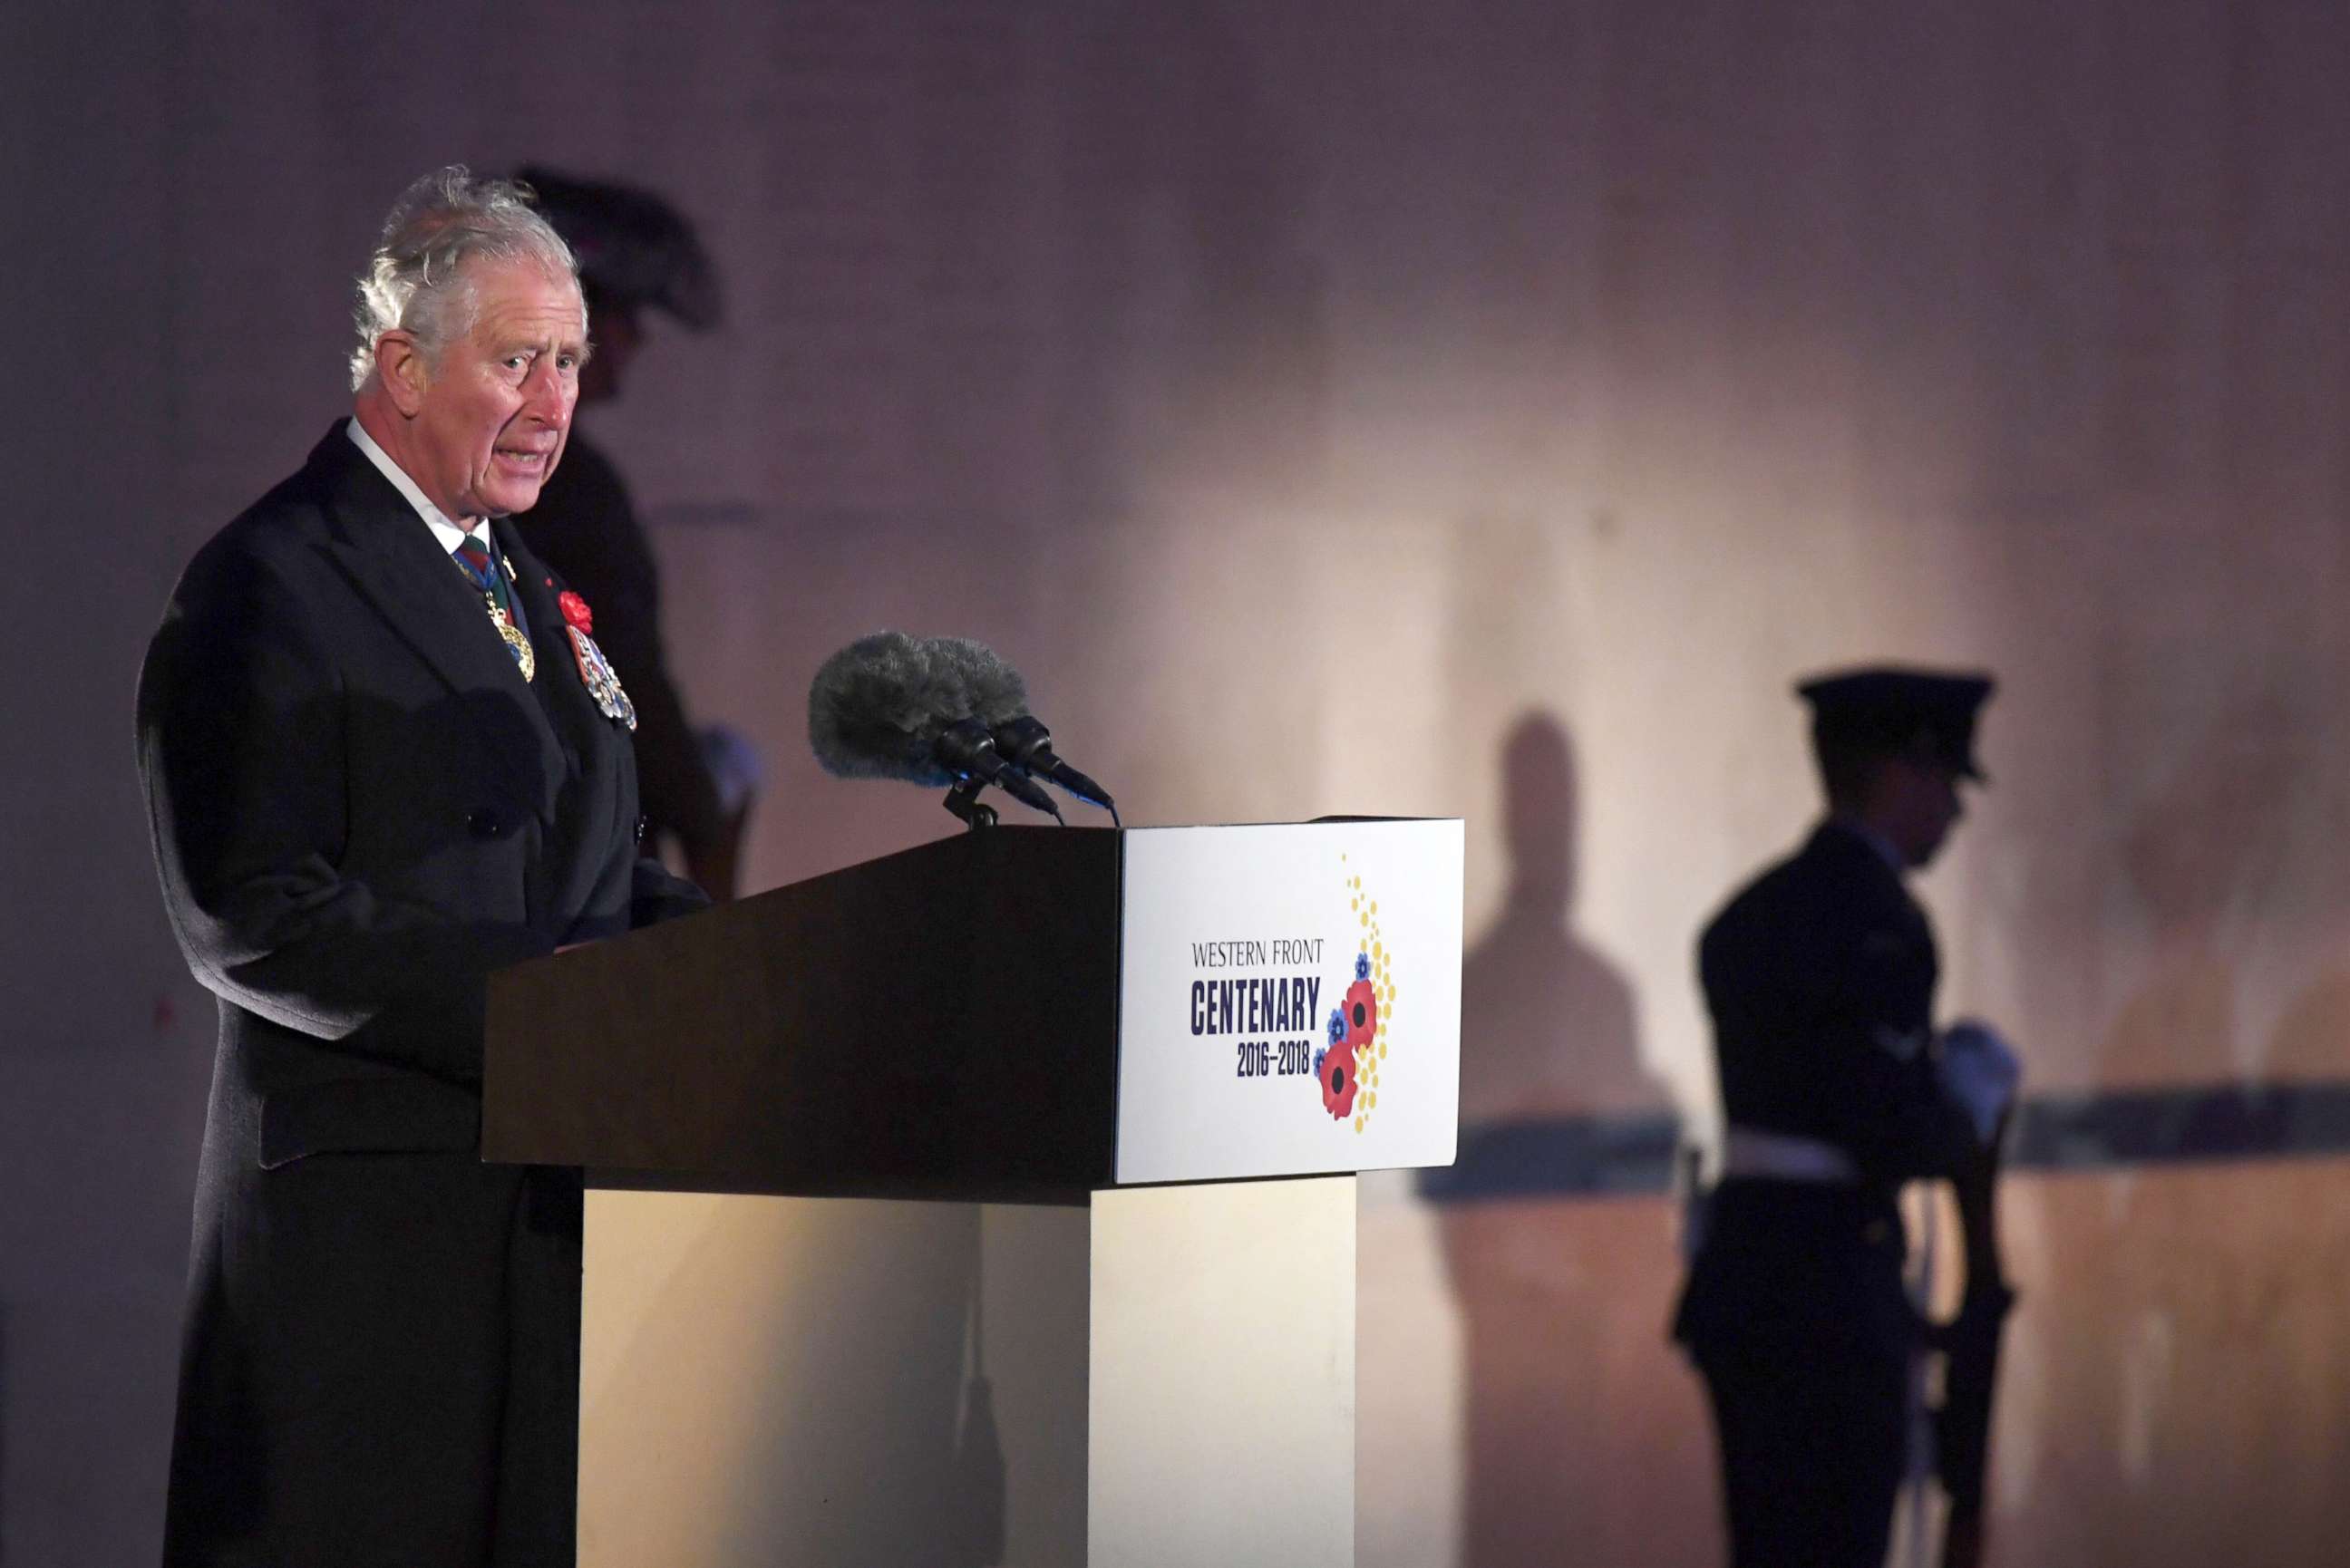 PHOTO: Prince Charles delivers a speech during the ANZAC Day dawn service at the Australian National Memorial at Villers-Bretonneux, April 25, 2018.